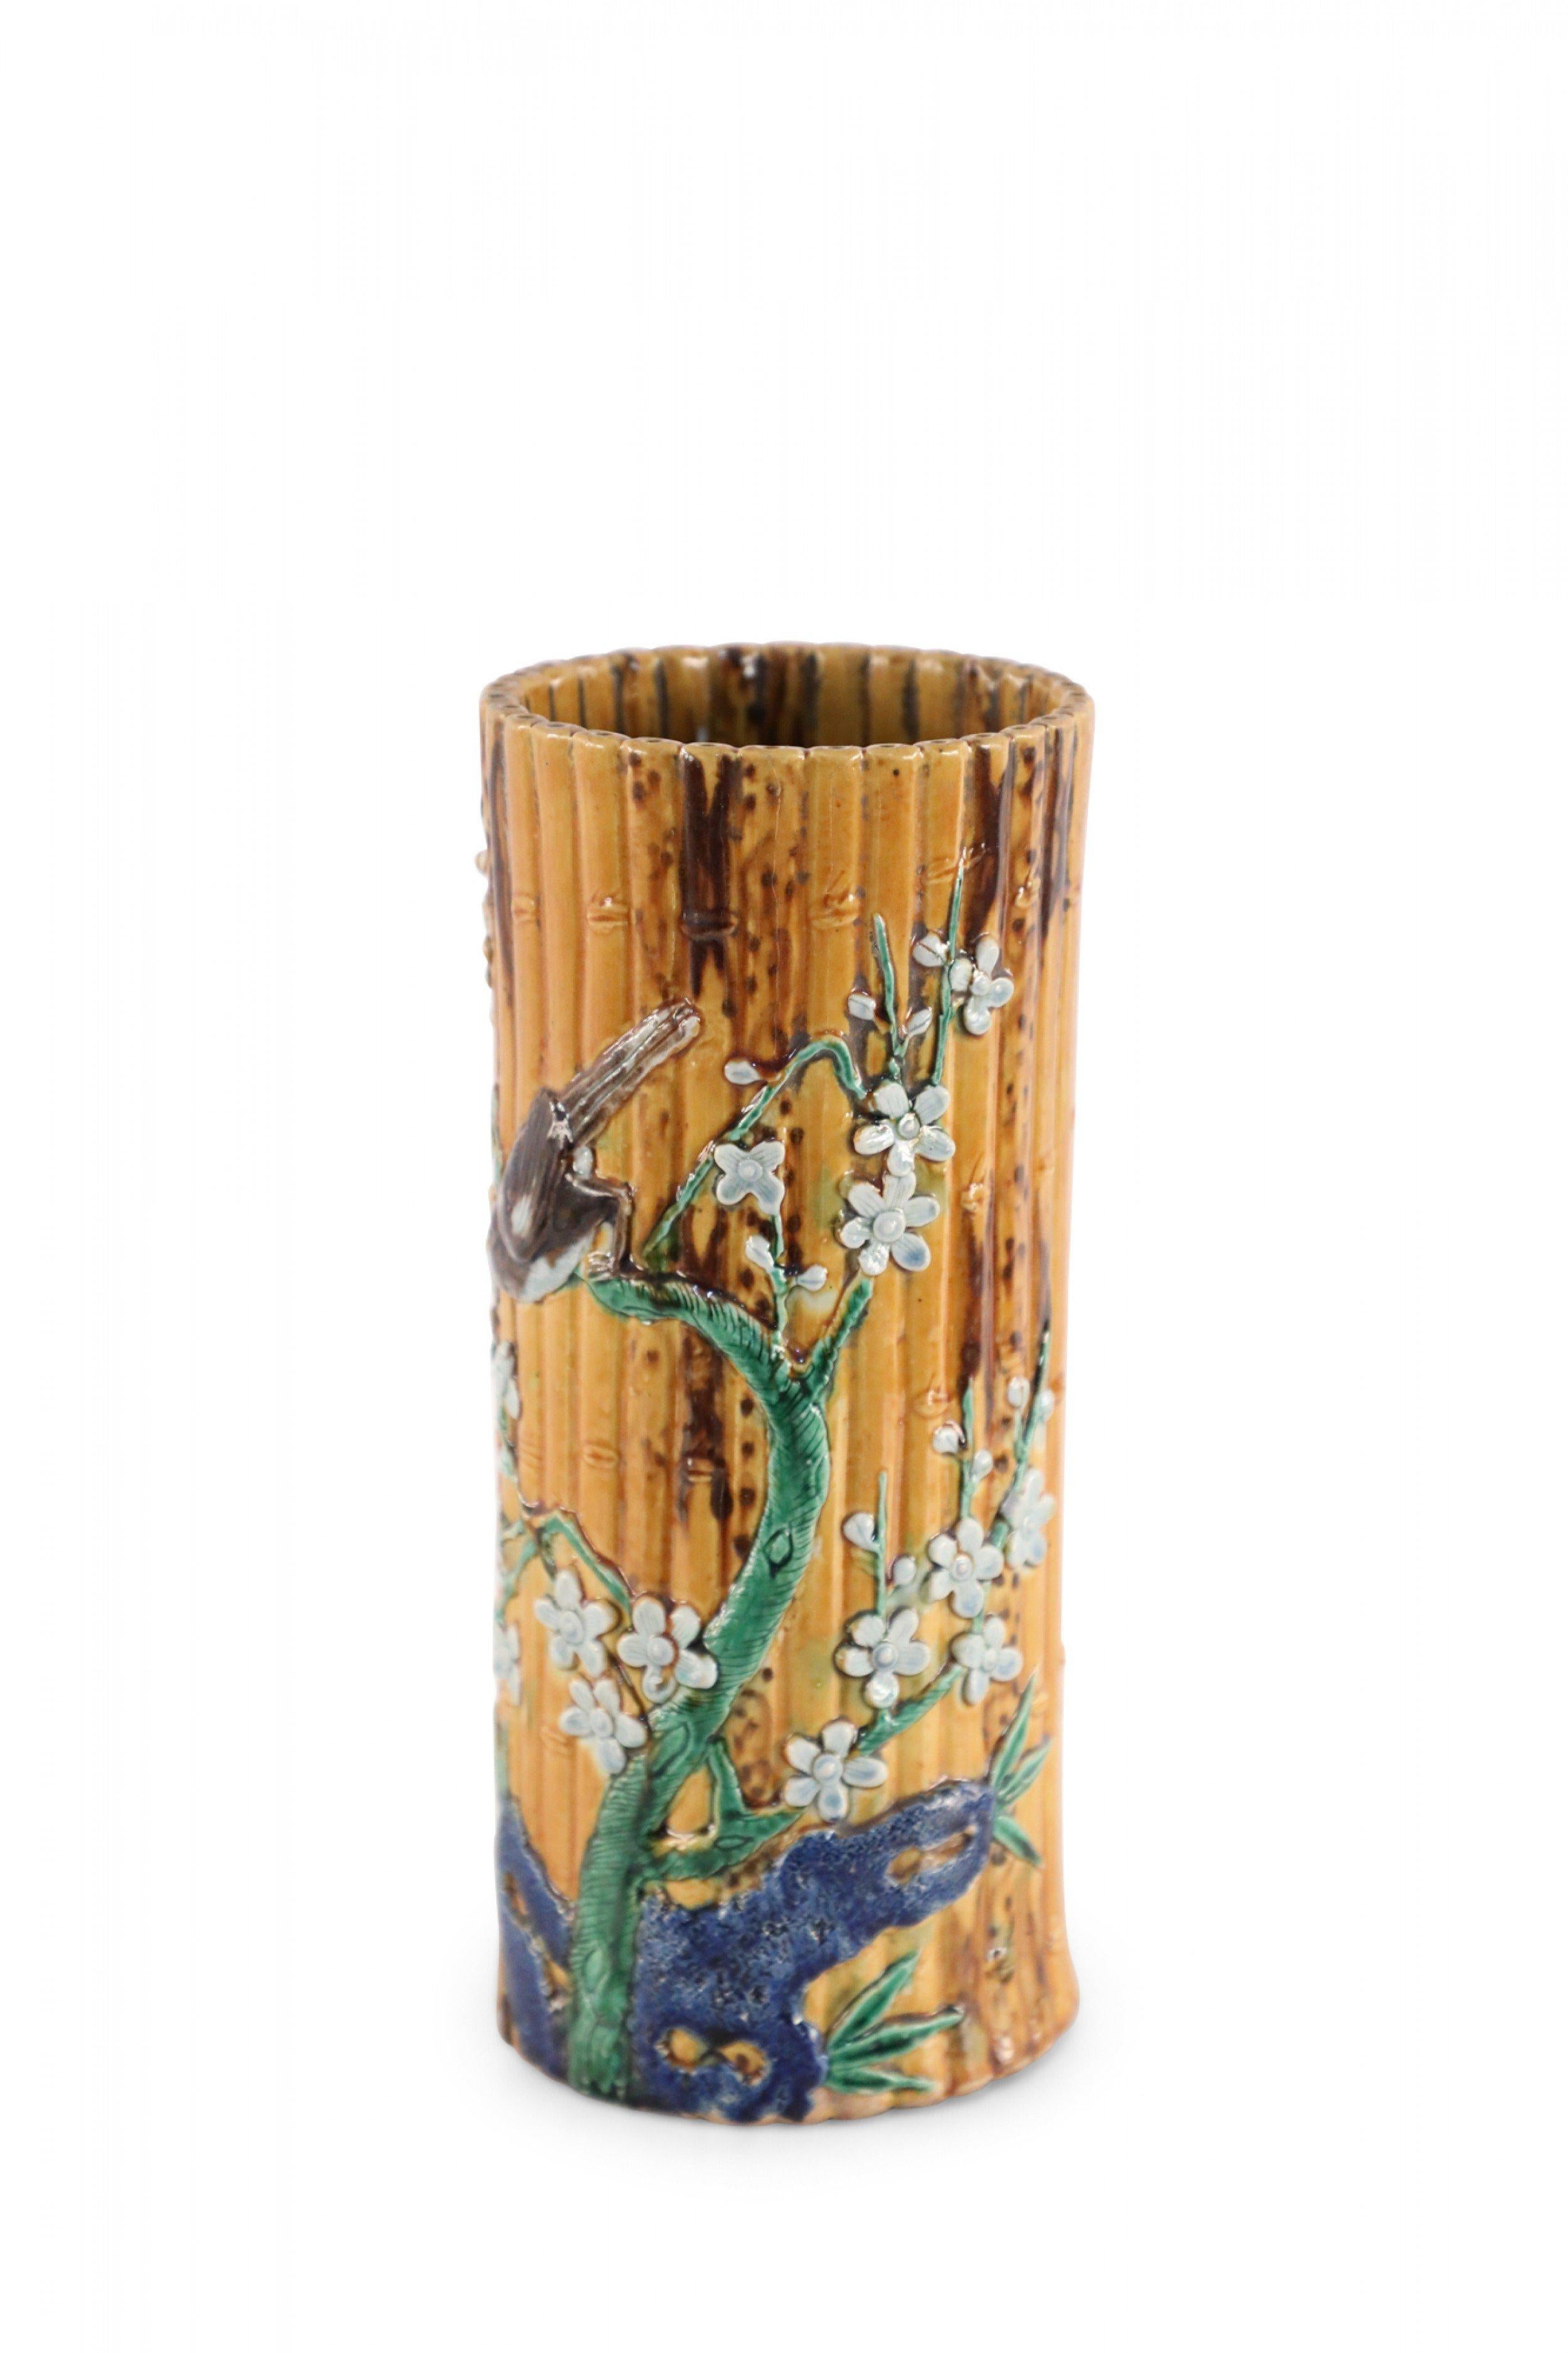 Chinese faux bamboo cylindrical porcelain vase, in a shape traditionally used as a hat stand in ancient China, decorated with a raised motif of a bird perched on a flowering branch.
      